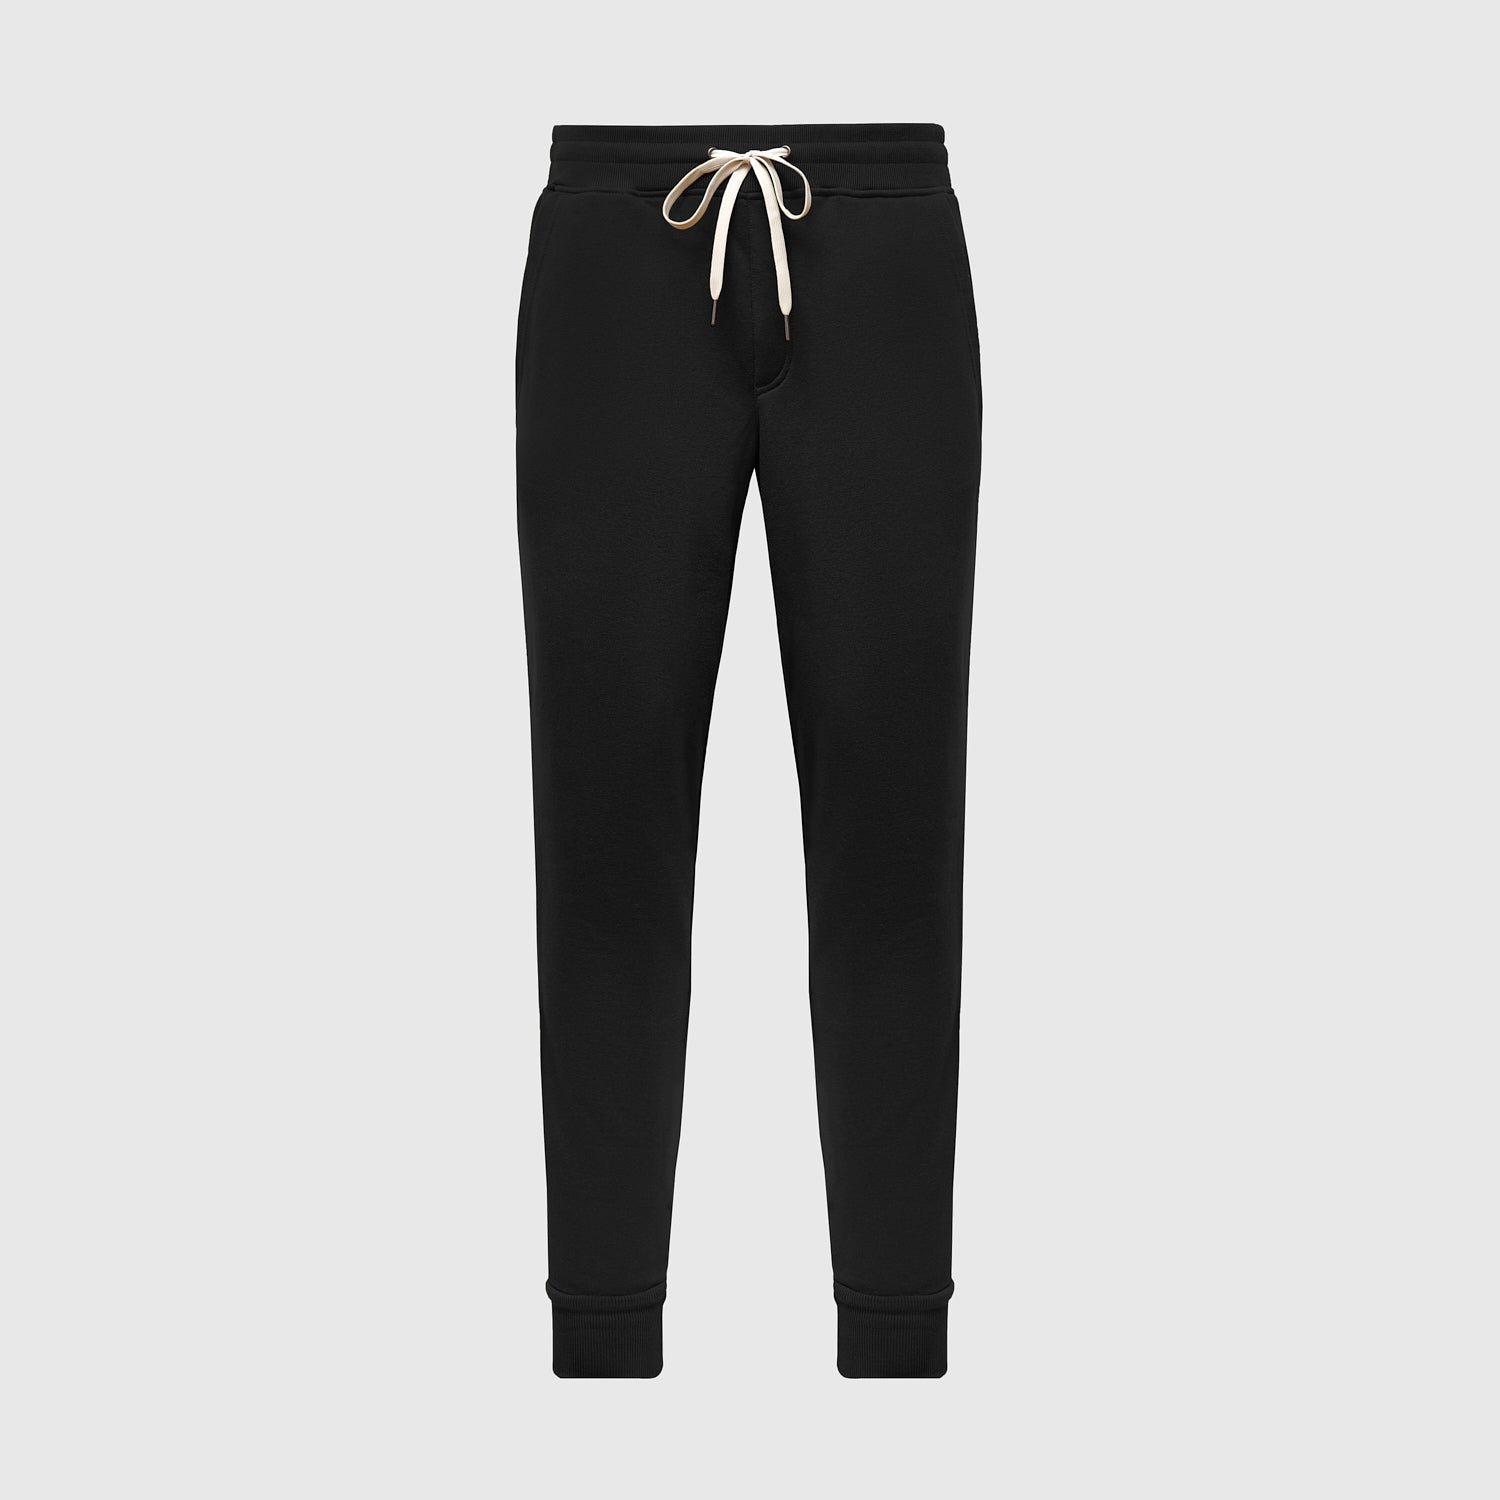 Black Fleece French Terry Joggers